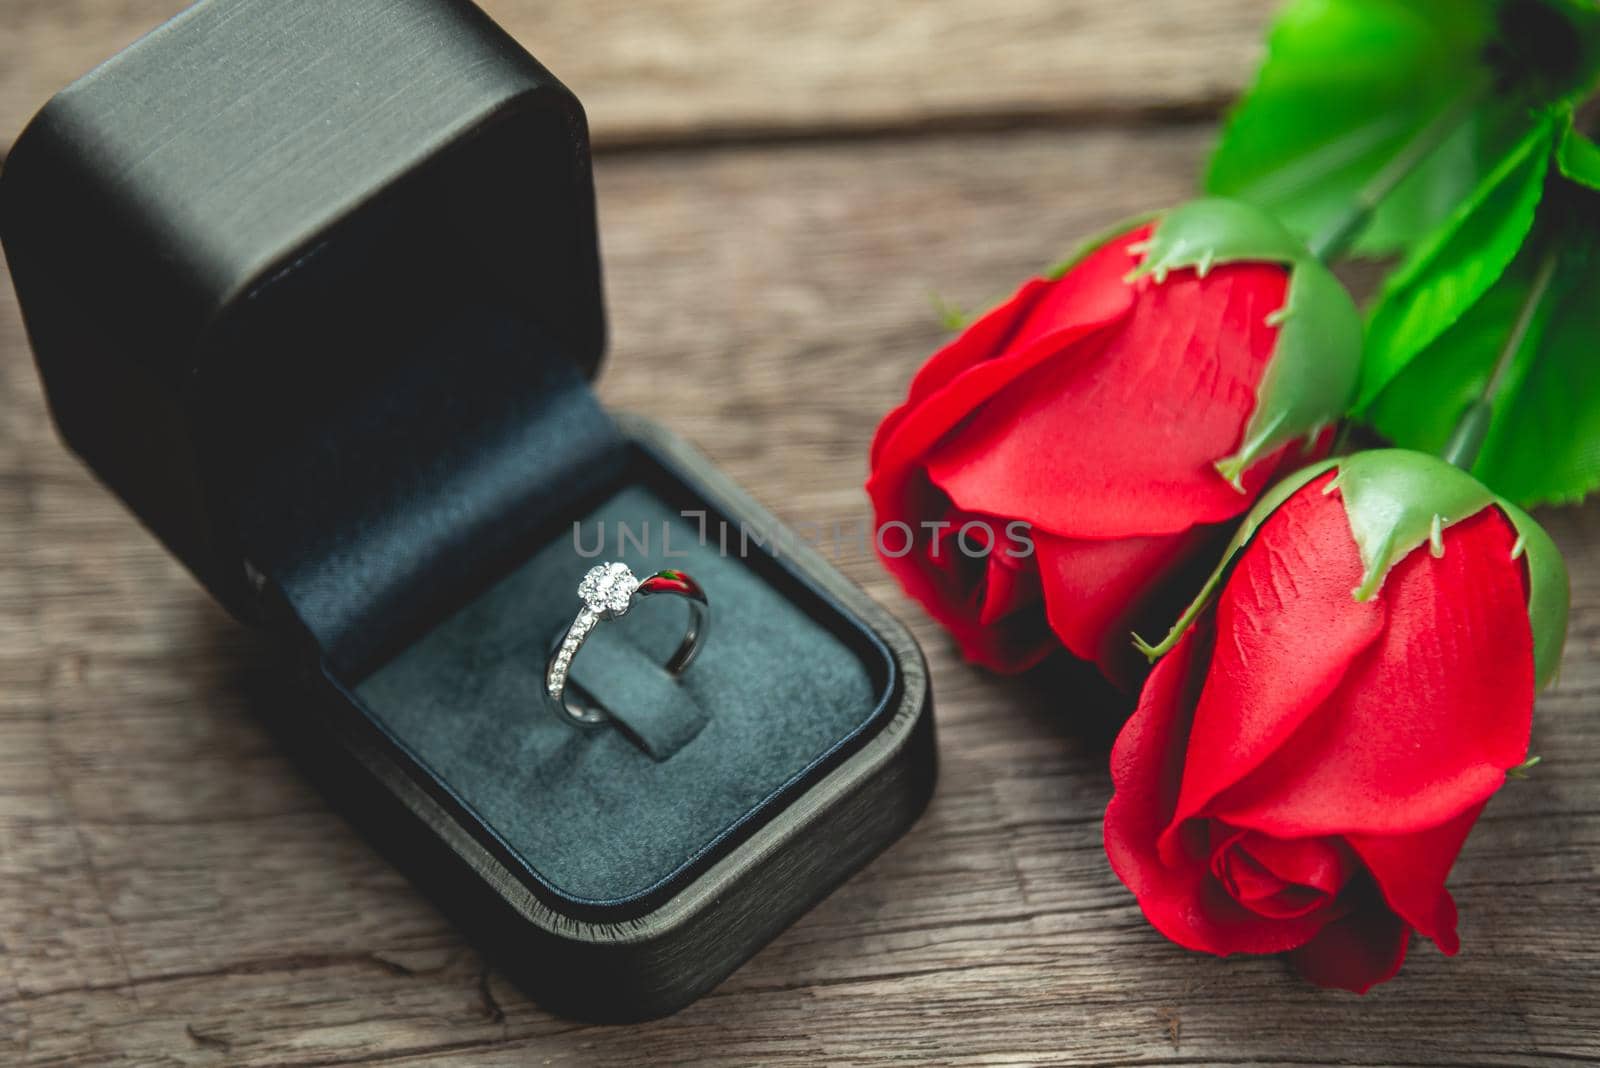 wedding ring and red rose flowers on wood table by Wmpix